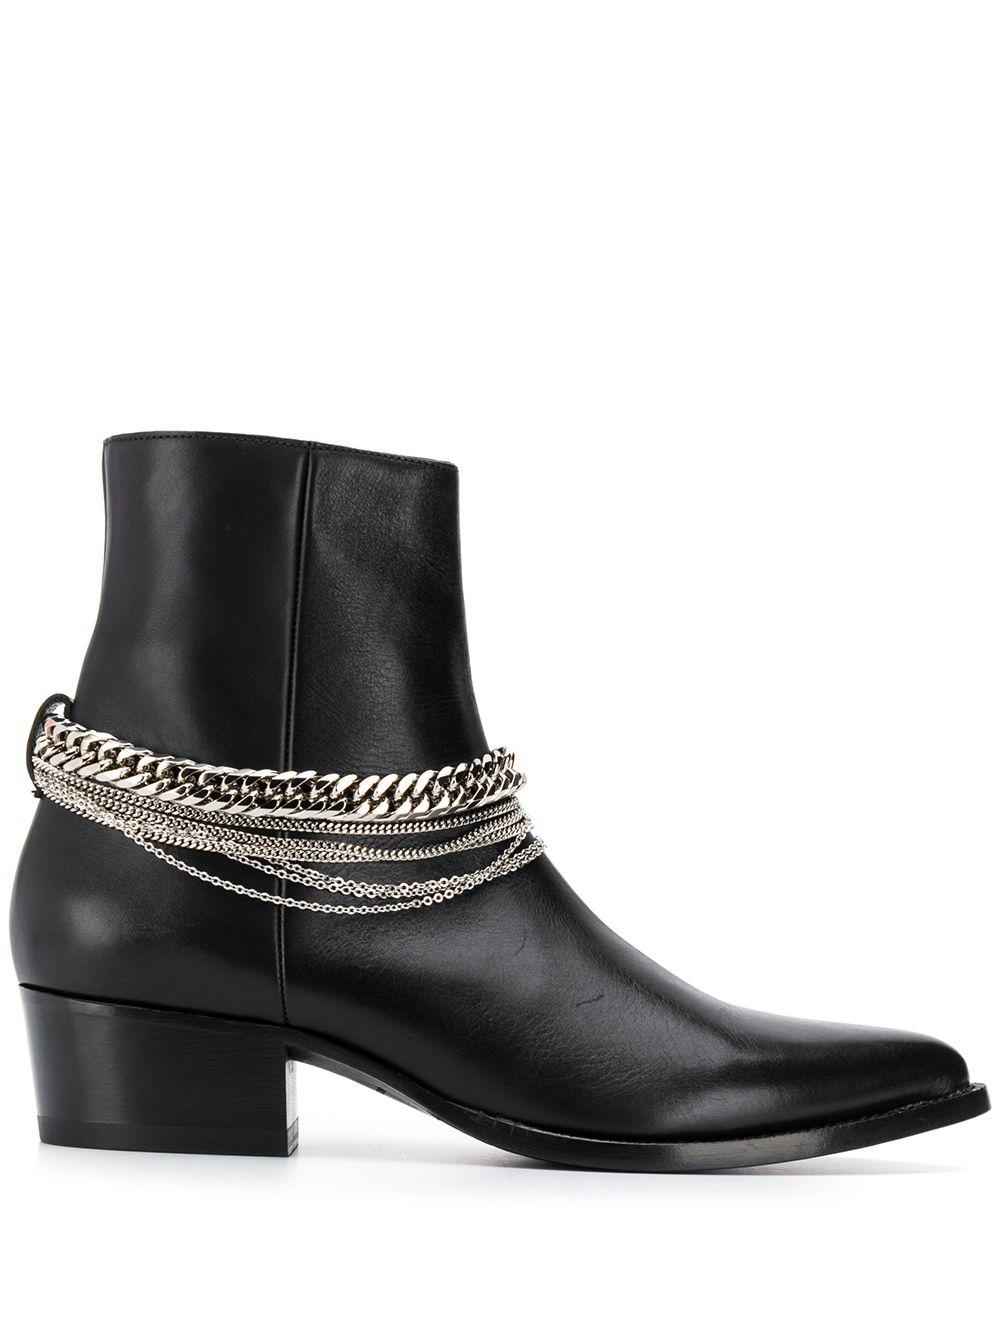 Amiri Leather Stivali Boots in Black for Men - Lyst